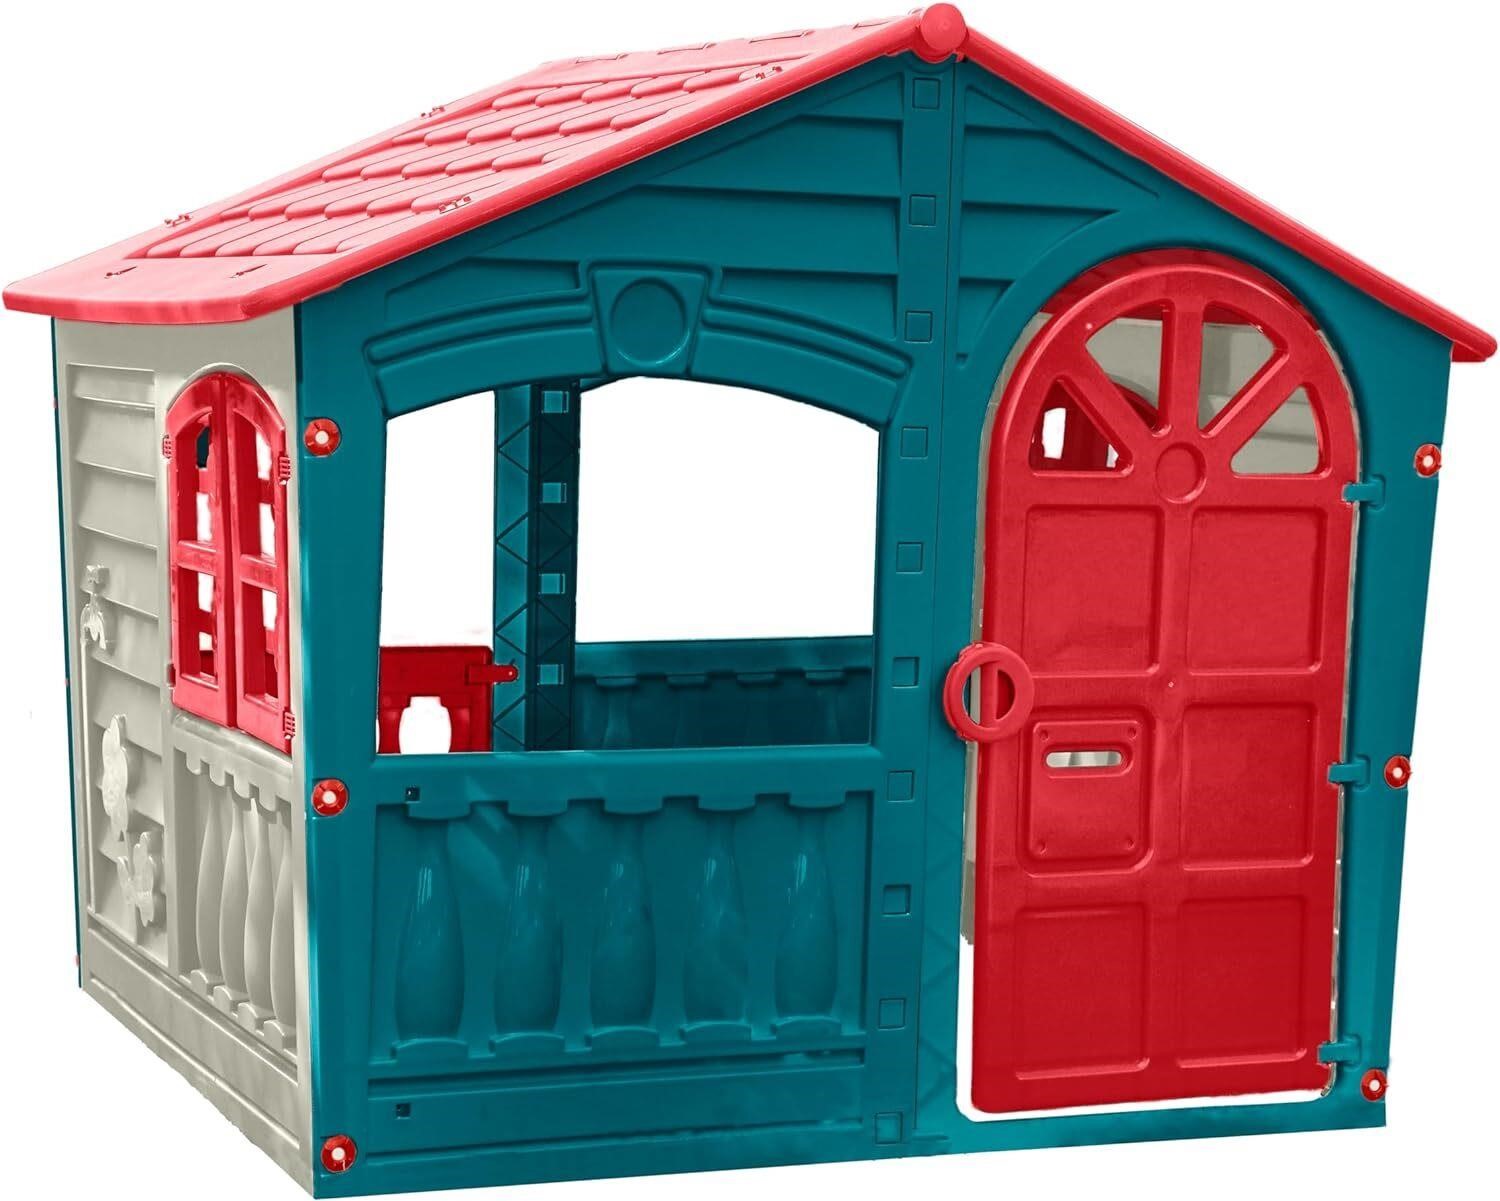 Palplay House of Fun  Red/Blue  Age 2+  3x5ft